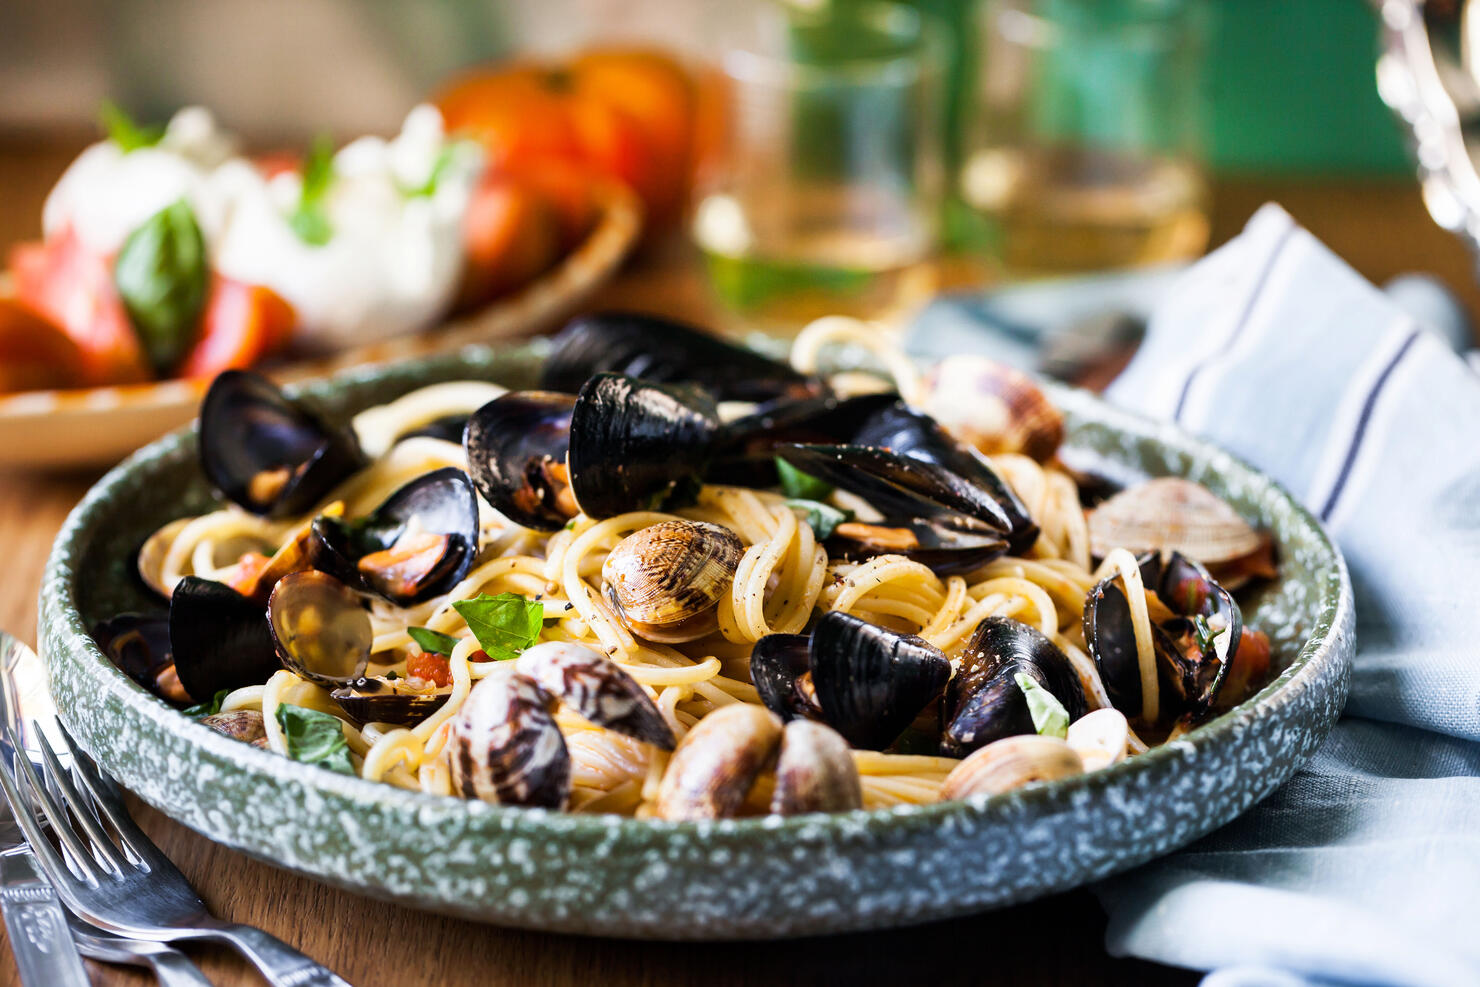 Italian seafood pasta with mussels and clams (spaghetti vongole)